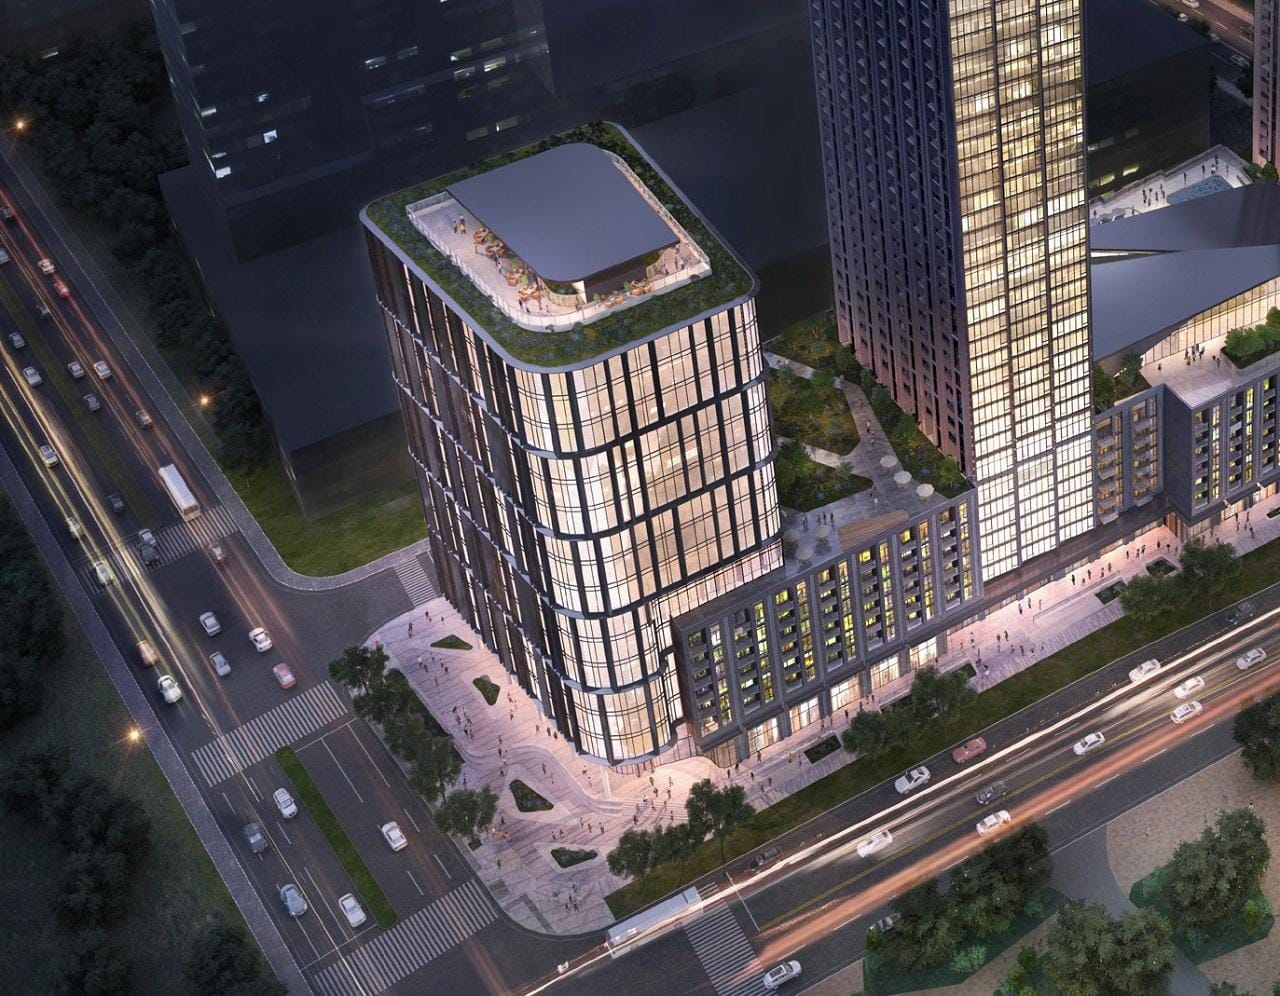 Exterior rendering of 7800 Jane Condos commercial building at night.